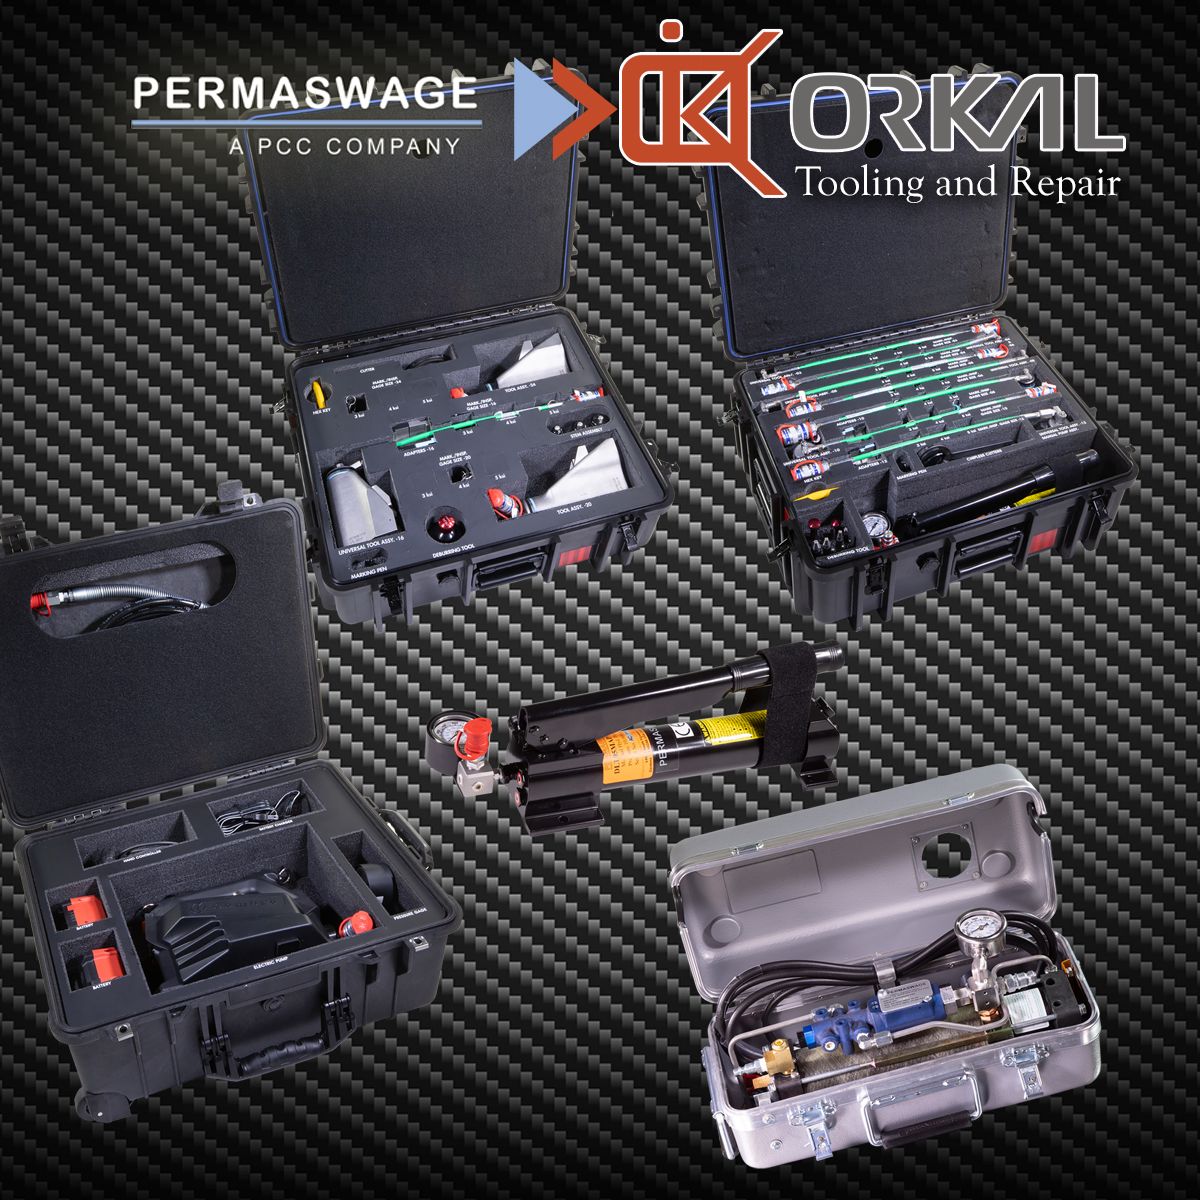 orkal, - **aerospace toolkits & cases**  
  permaswage & orkal tooling on carbon-fiber background for efficient access.  

- **advanced fittings solutions**  
  aircraft-grade components ensuring fluid transfer system compliance and security.

- **expert repair services**  
  orkal industries providing aviation-quality tooling and logistic support.

- **precision assembly solutions**  
  streamline your supply chain with tailor-made aerospace tools from orkal industries.